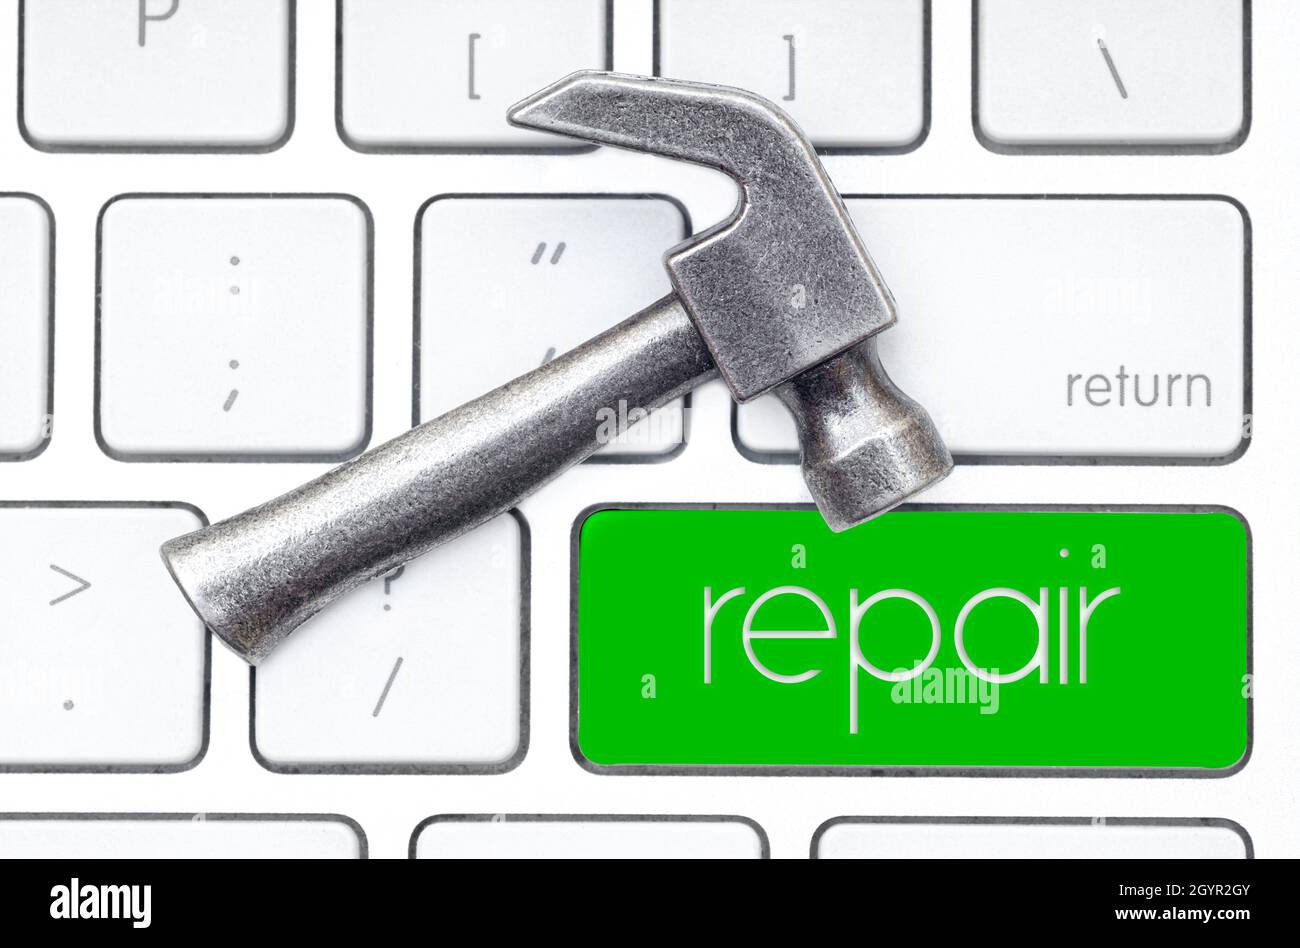 Small steel hammer lies on the keyboard, which has a green key labeled REPAIR. Hardware service concept. Stock Photo